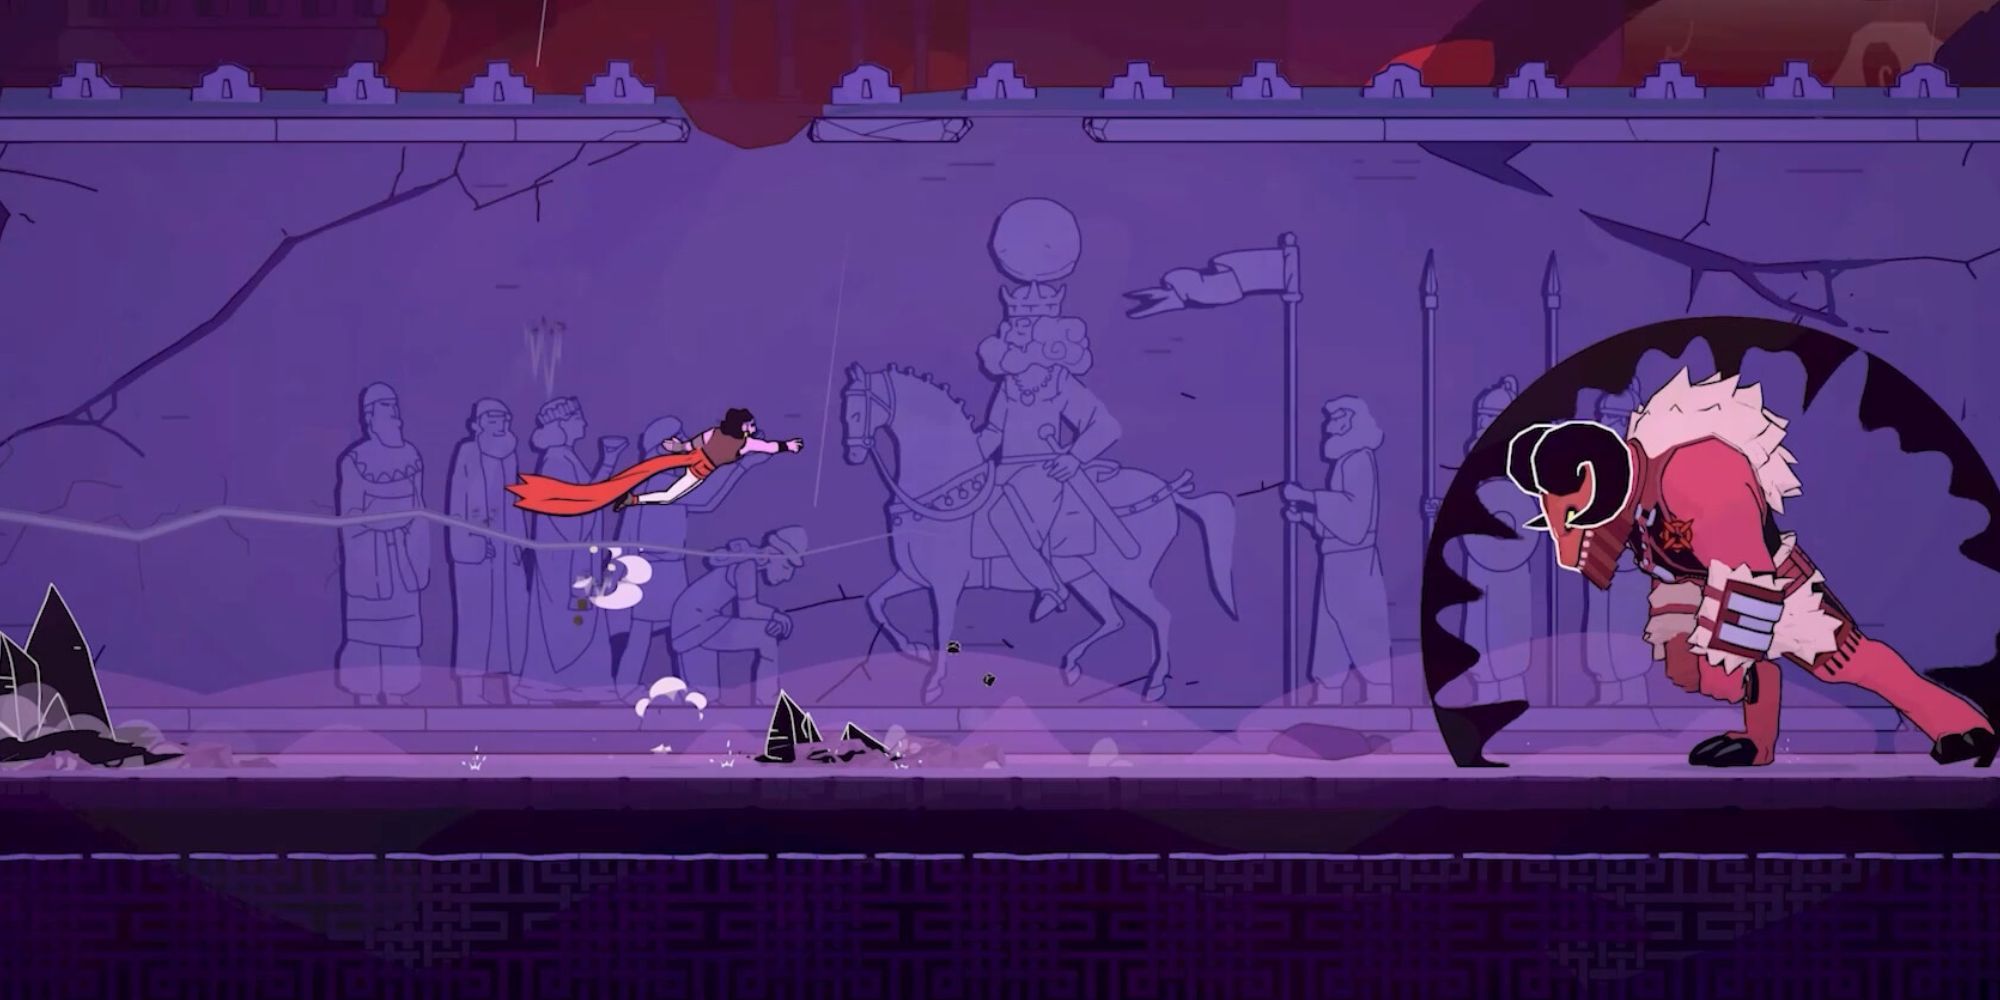 The Rogue Prince of Persia fighting against a Minotaur.